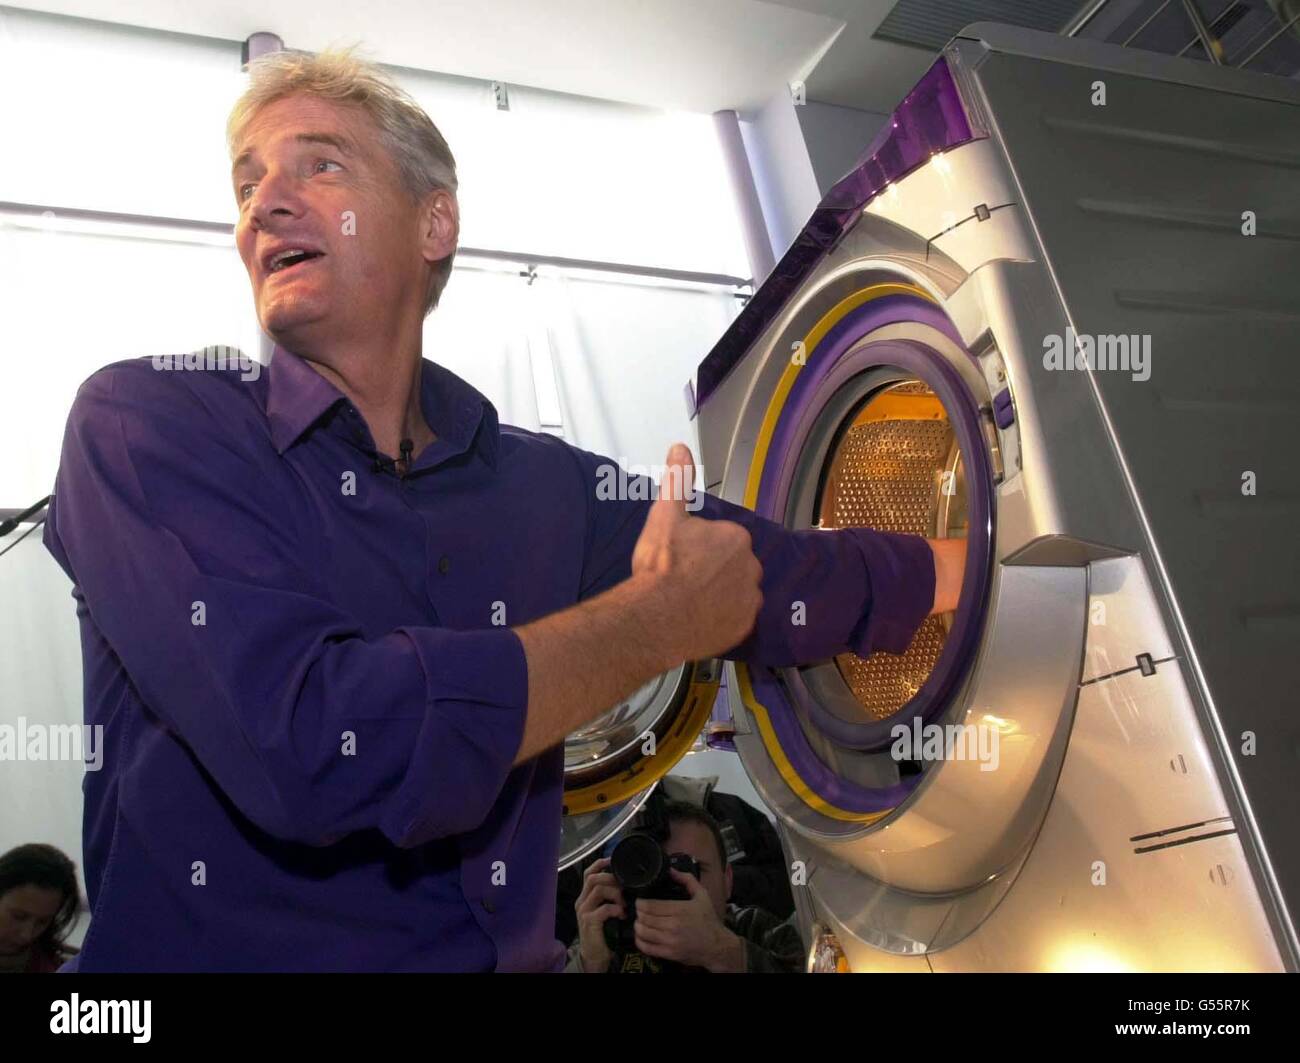 Inventor James Dyson with his new Dyson Contrarotator washing machine which  he launched at his Wiltshire headquarters Stock Photo - Alamy